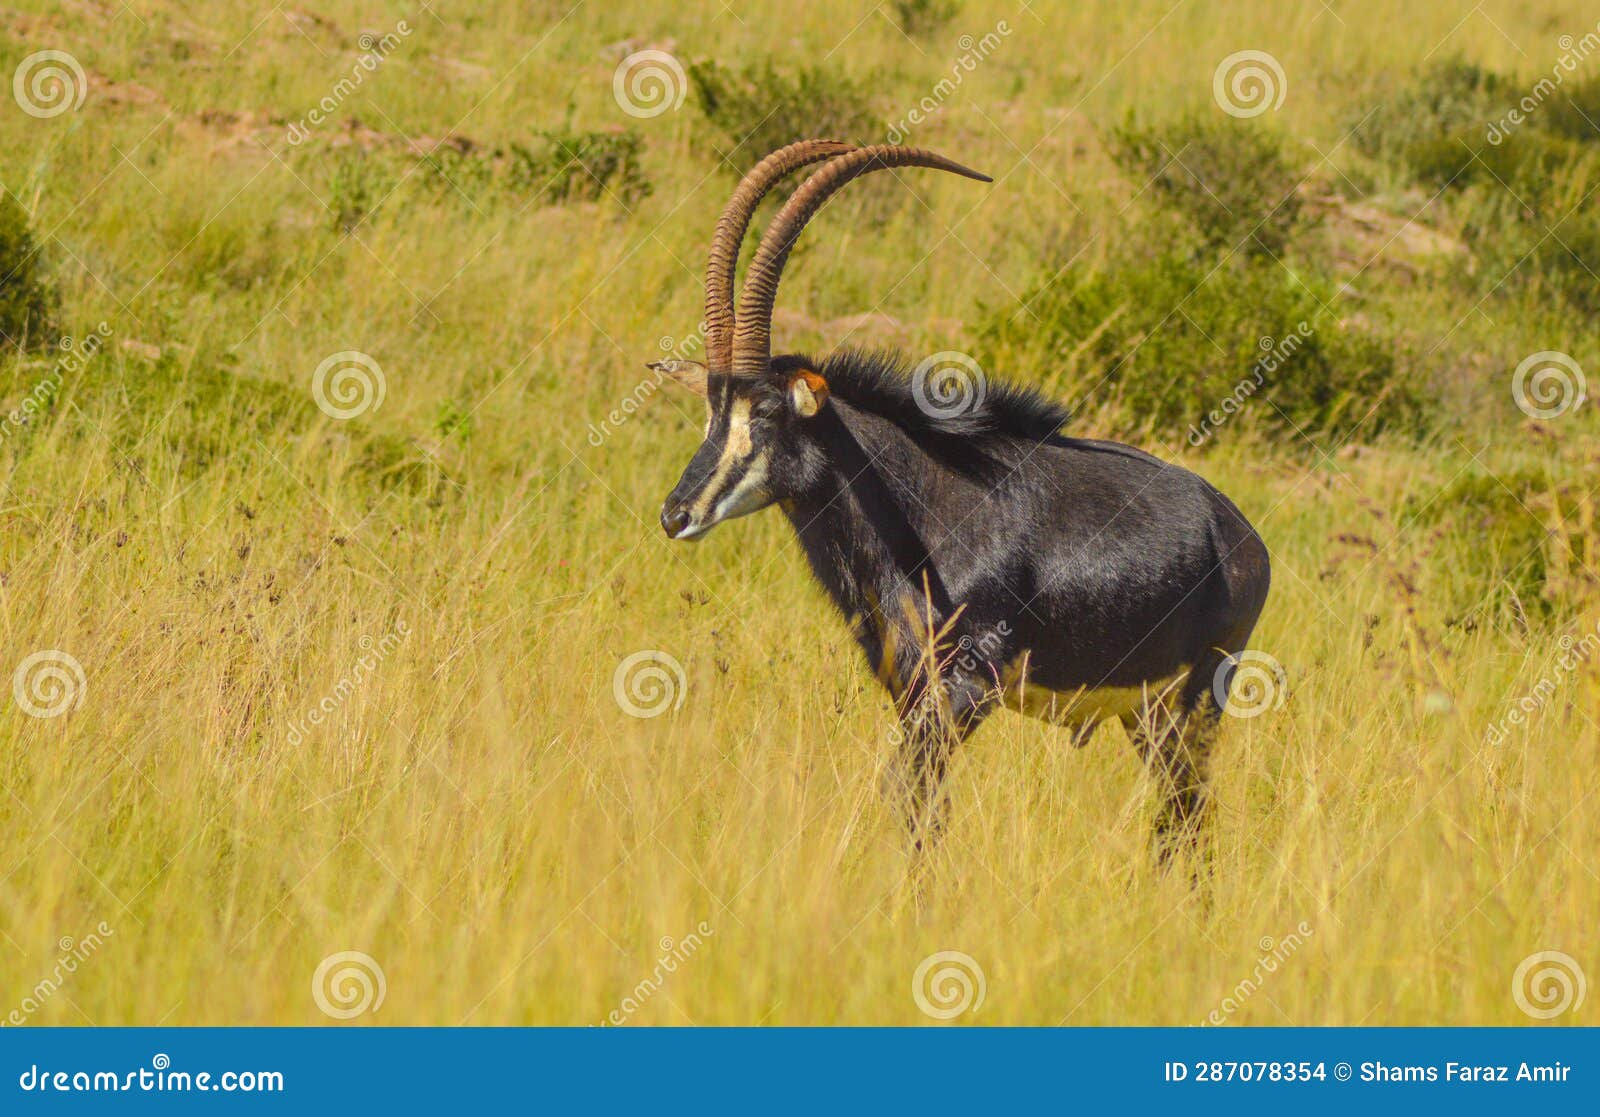 closeup portrait of a cute and majestic sable antelope in johannesburg game reserve south africa